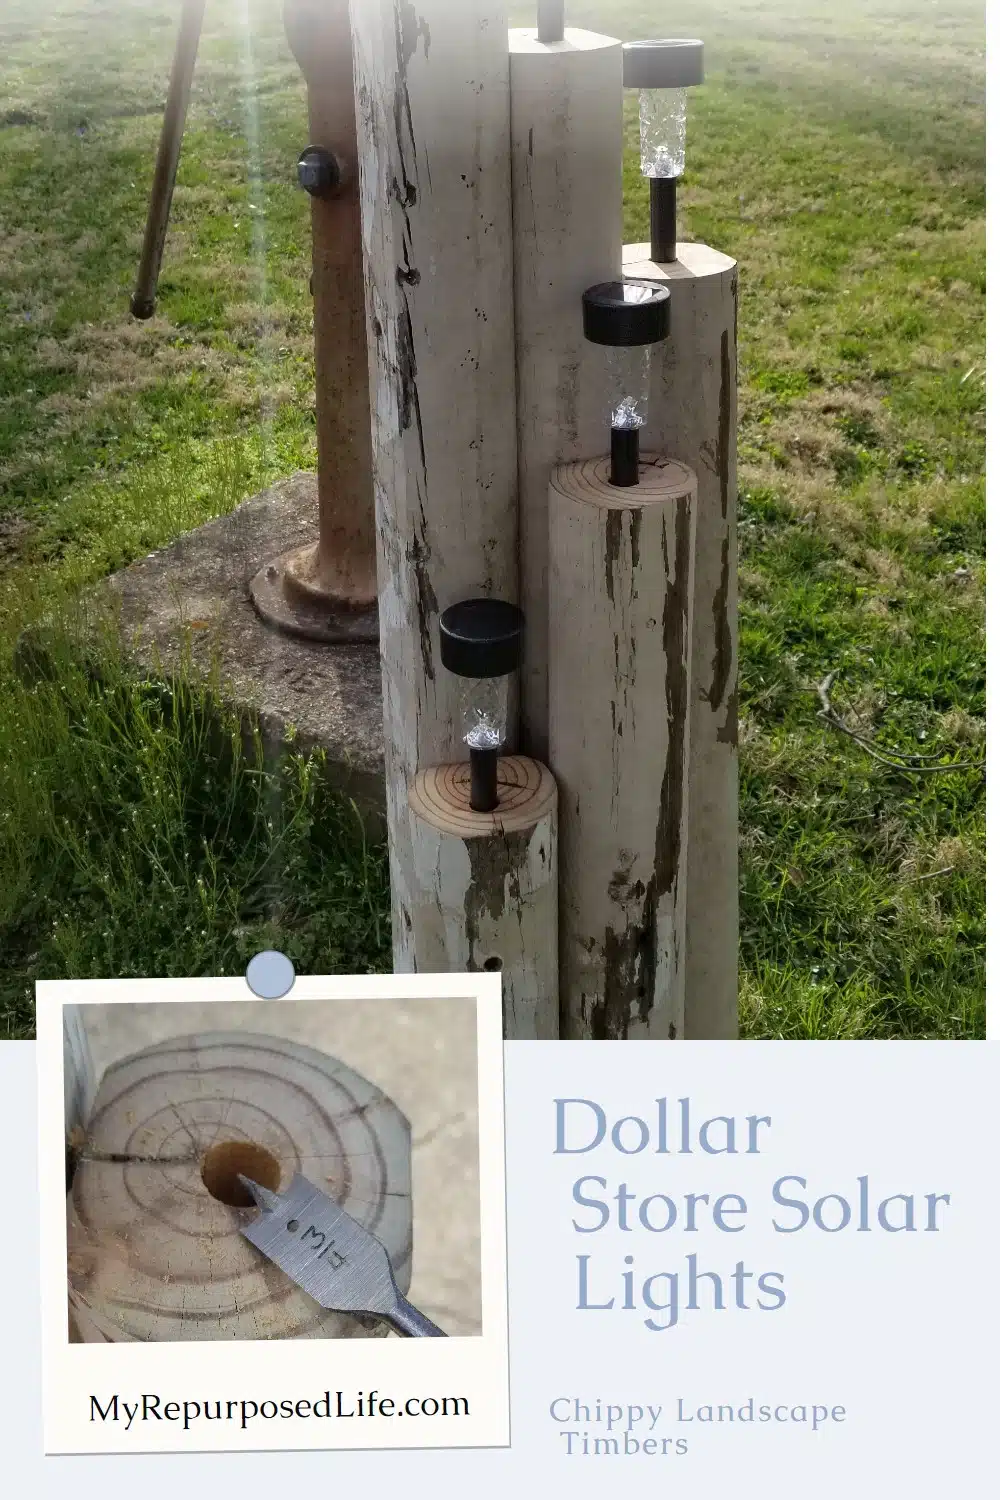 Use reclaimed landscape timbers to make a light feature for your outdoor space. Adding solar lights from the dollar store makes this nearly a free project. #MyRepurposedLife via @repurposedlife